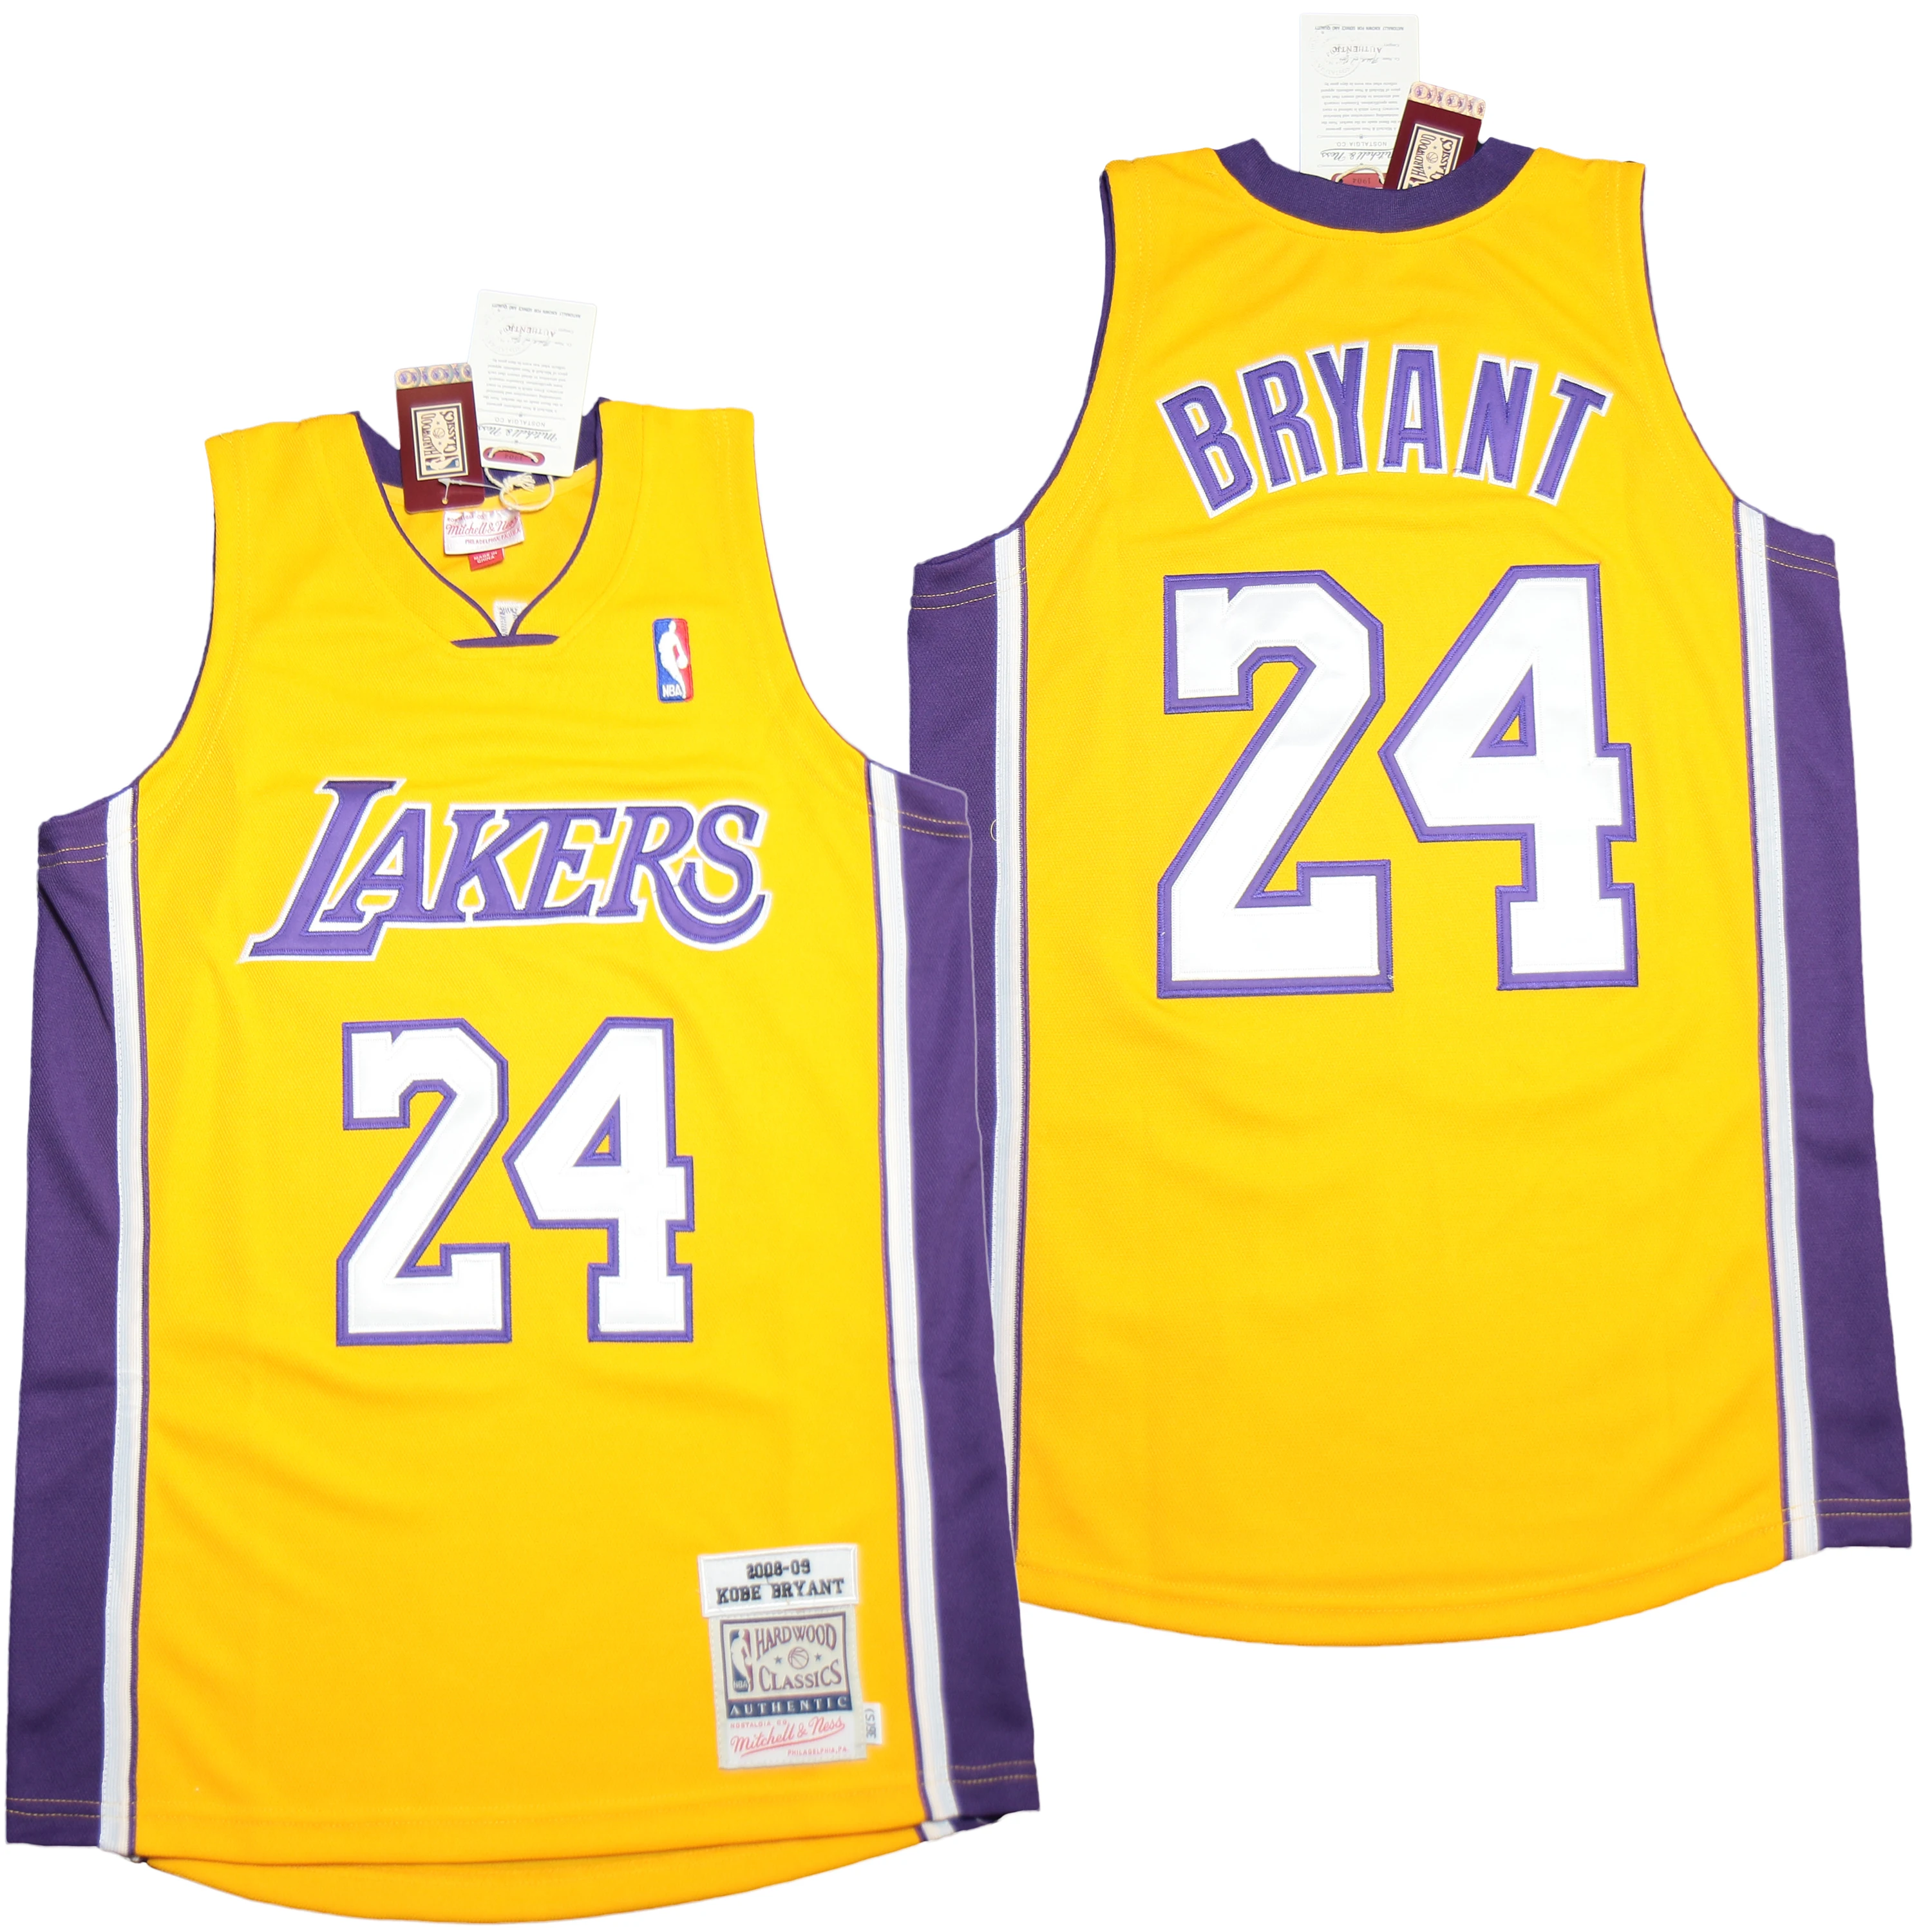 

Best Quality NB A Men's Mitchell Basketball Jersey Stitched Hardwood Classic Uniform Bryant #8 # 24 Shirts, As picture